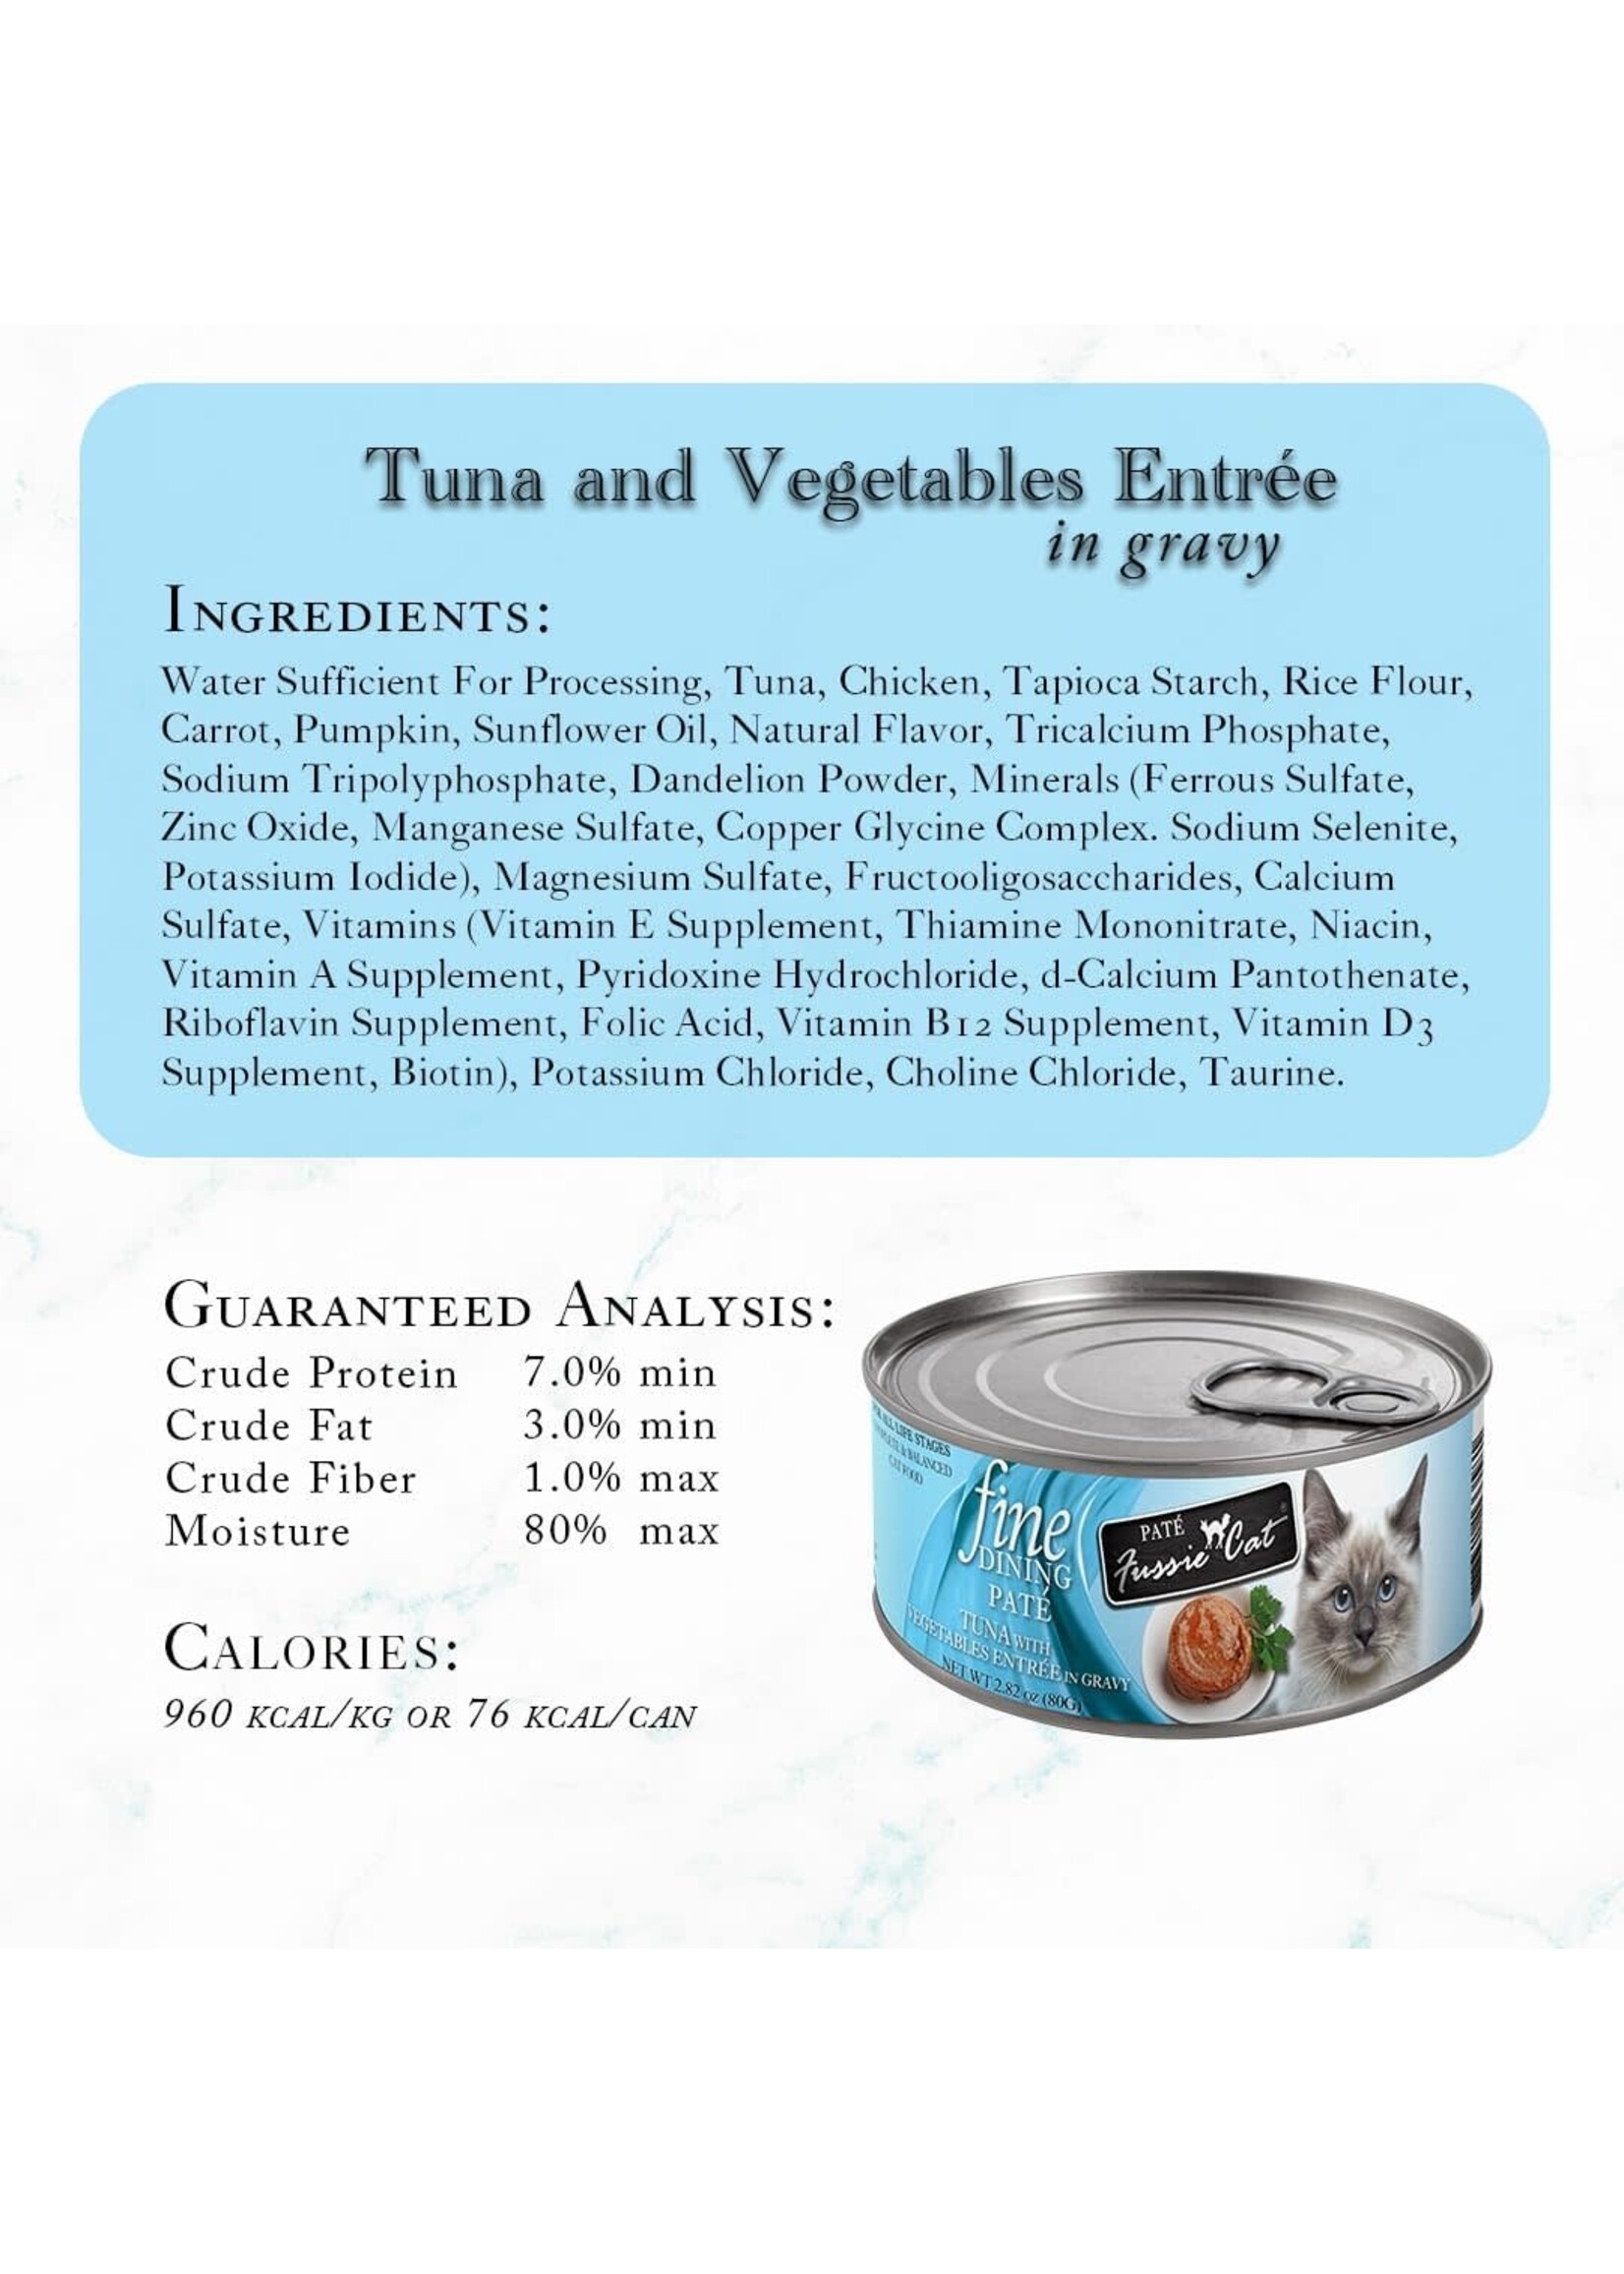 Fussie Cat Fine Dining Pate Tuna with Vegetables Entrée In Gravy Wet Cat Food 2.82 oz